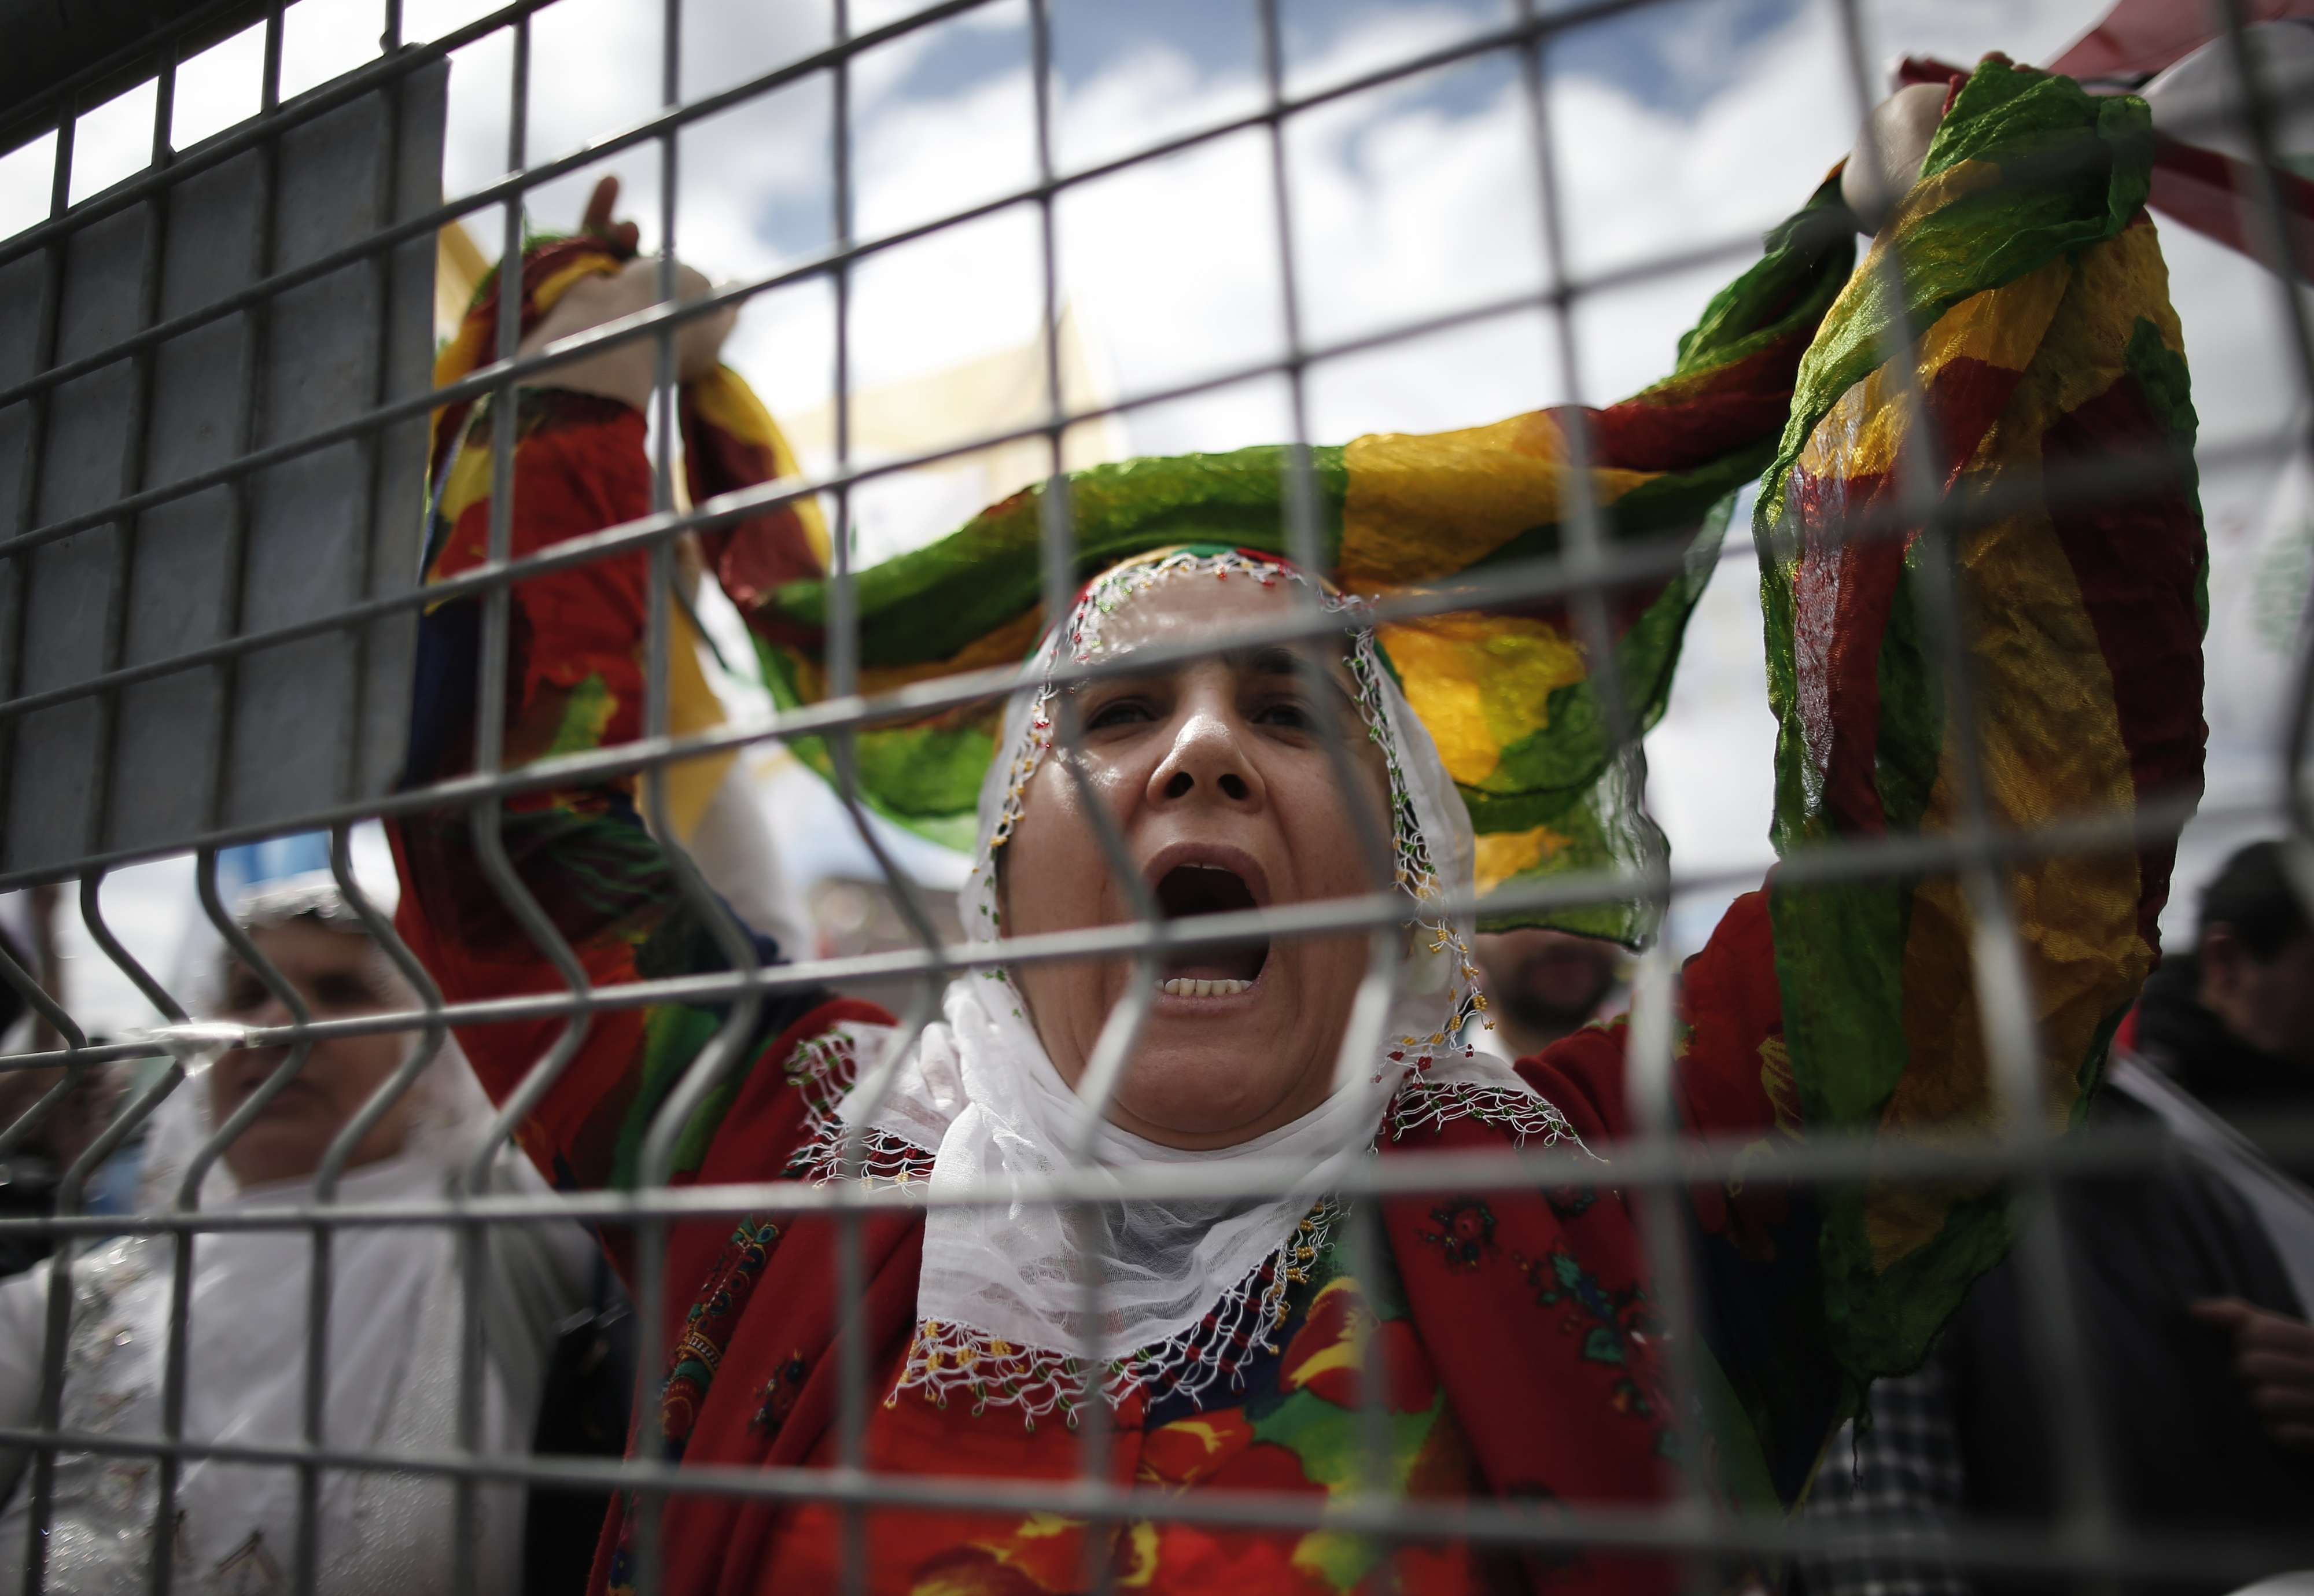 In this photo taken on Sunday, March 24, 2019, a woman shouts as thousands of supporters of pro-Kurdish Peoples' Democratic Party, or HDP, gather to celebrate the Kurdish New Year and to attend a campaign rally in Istanbul, ahead of local elections scheduled for March 31, 2019.